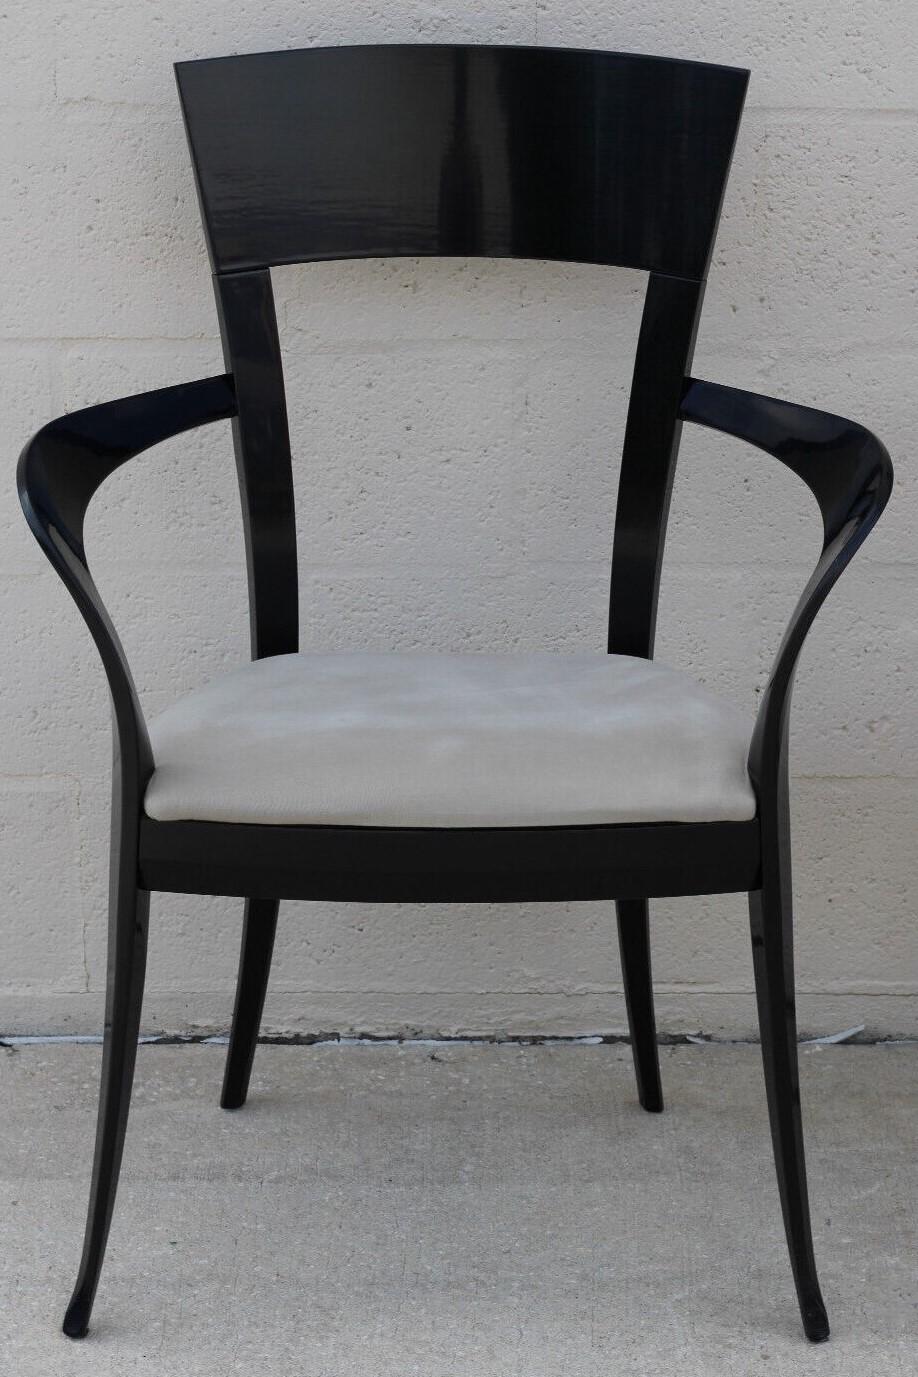 Black Lacquer Klismos Style Dining Armchairs by Pietro Costantini, a Set of 8 For Sale 4